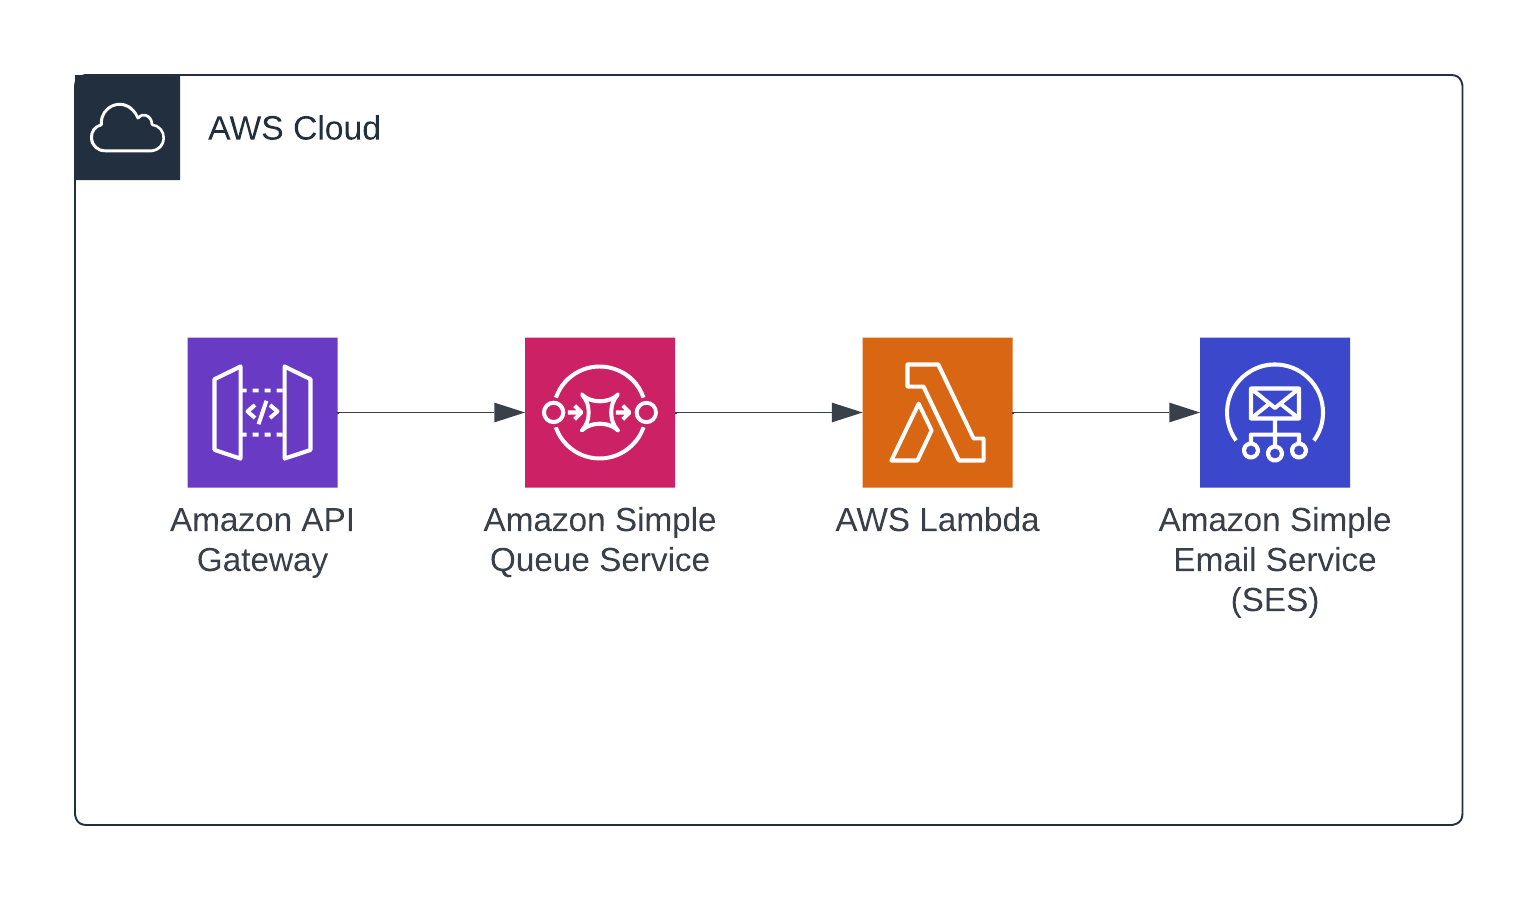 Diagram - serverless email delivery with AWS API Gateway, SQS, Lambda and SES